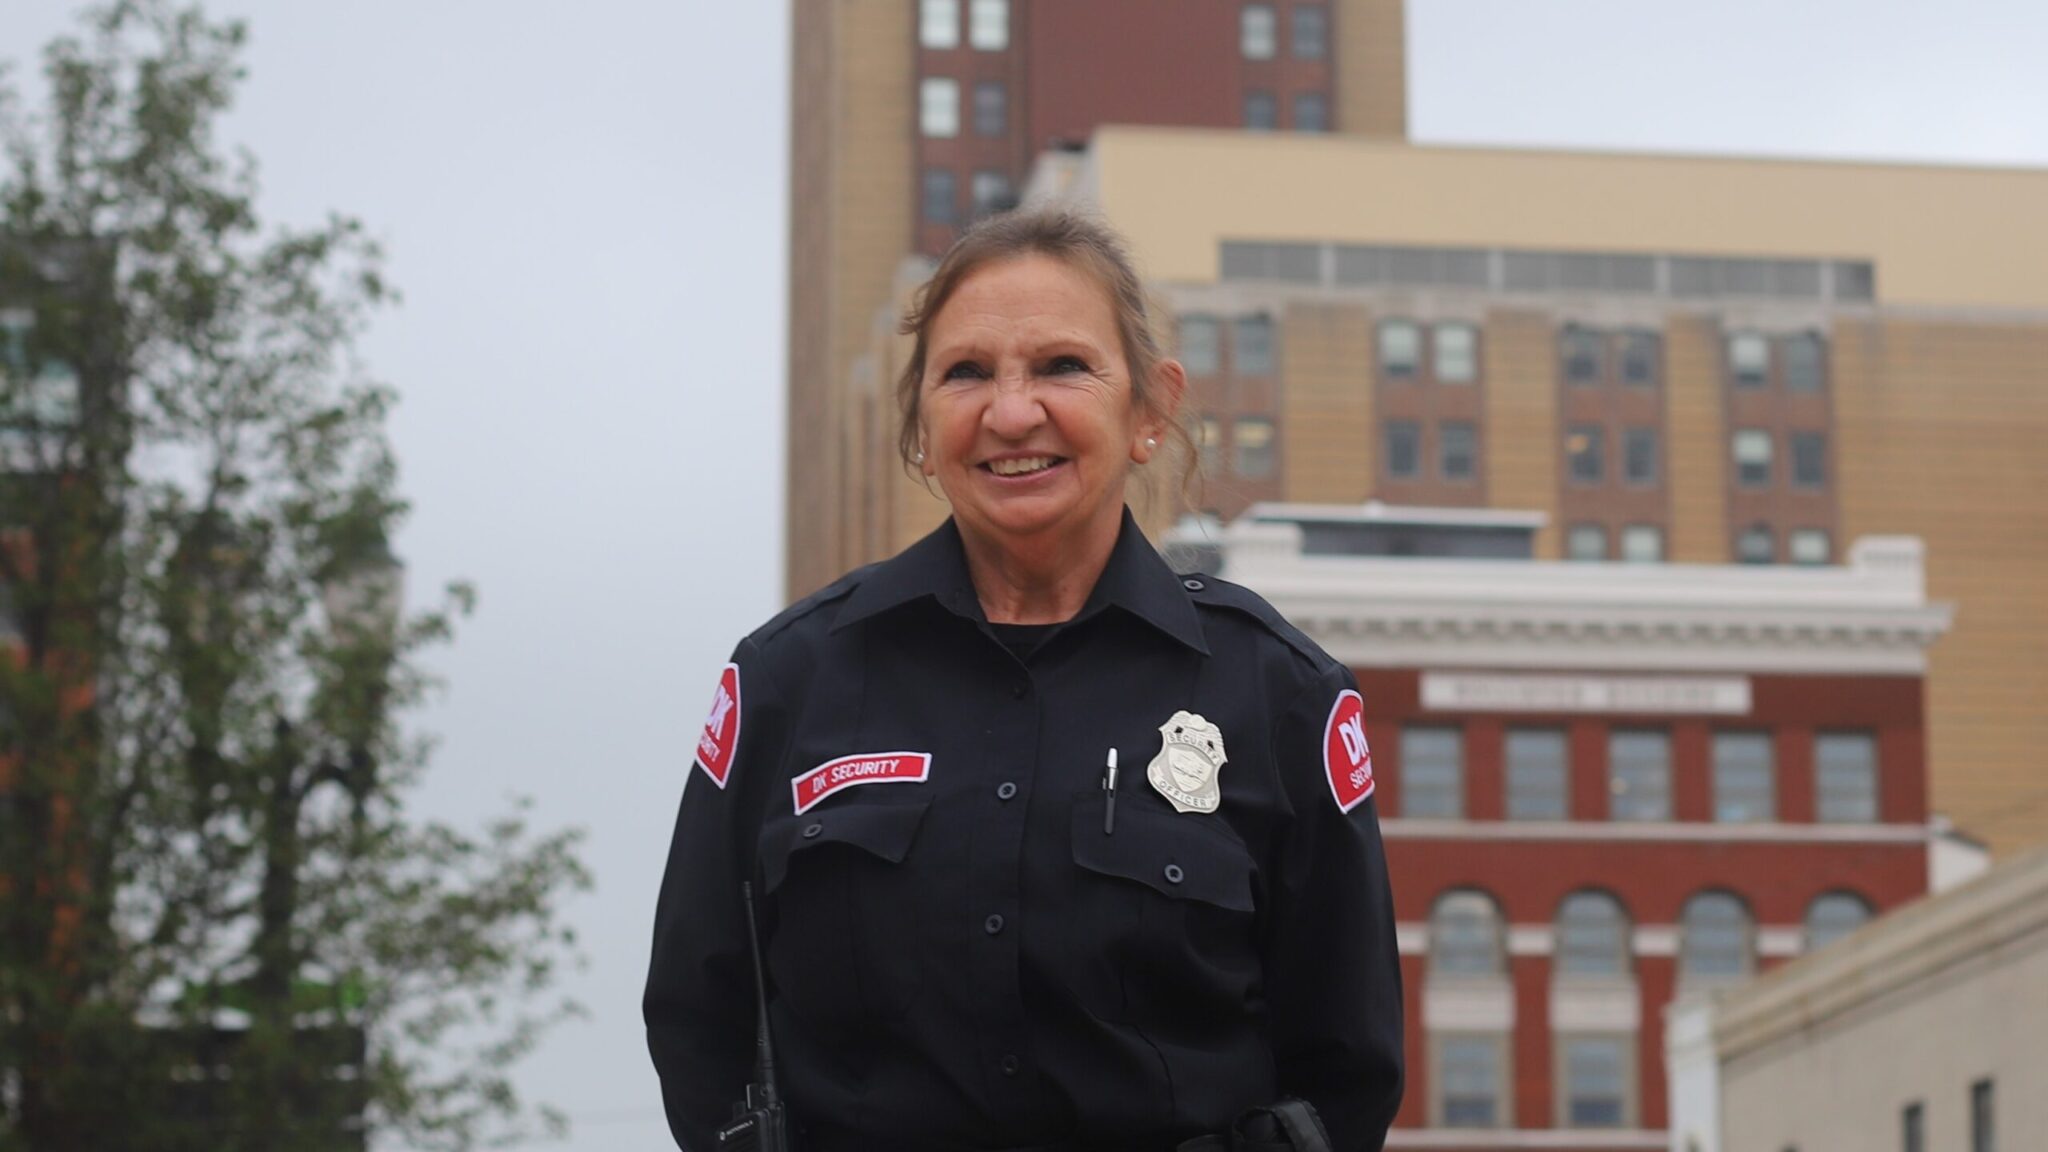 A female security guard, dressed in a DK Security navy security uniform, stands guard at a work site in downtown Lansing, Michigan. Boji Tower is partially visible in the background of the street the officer is standing on.